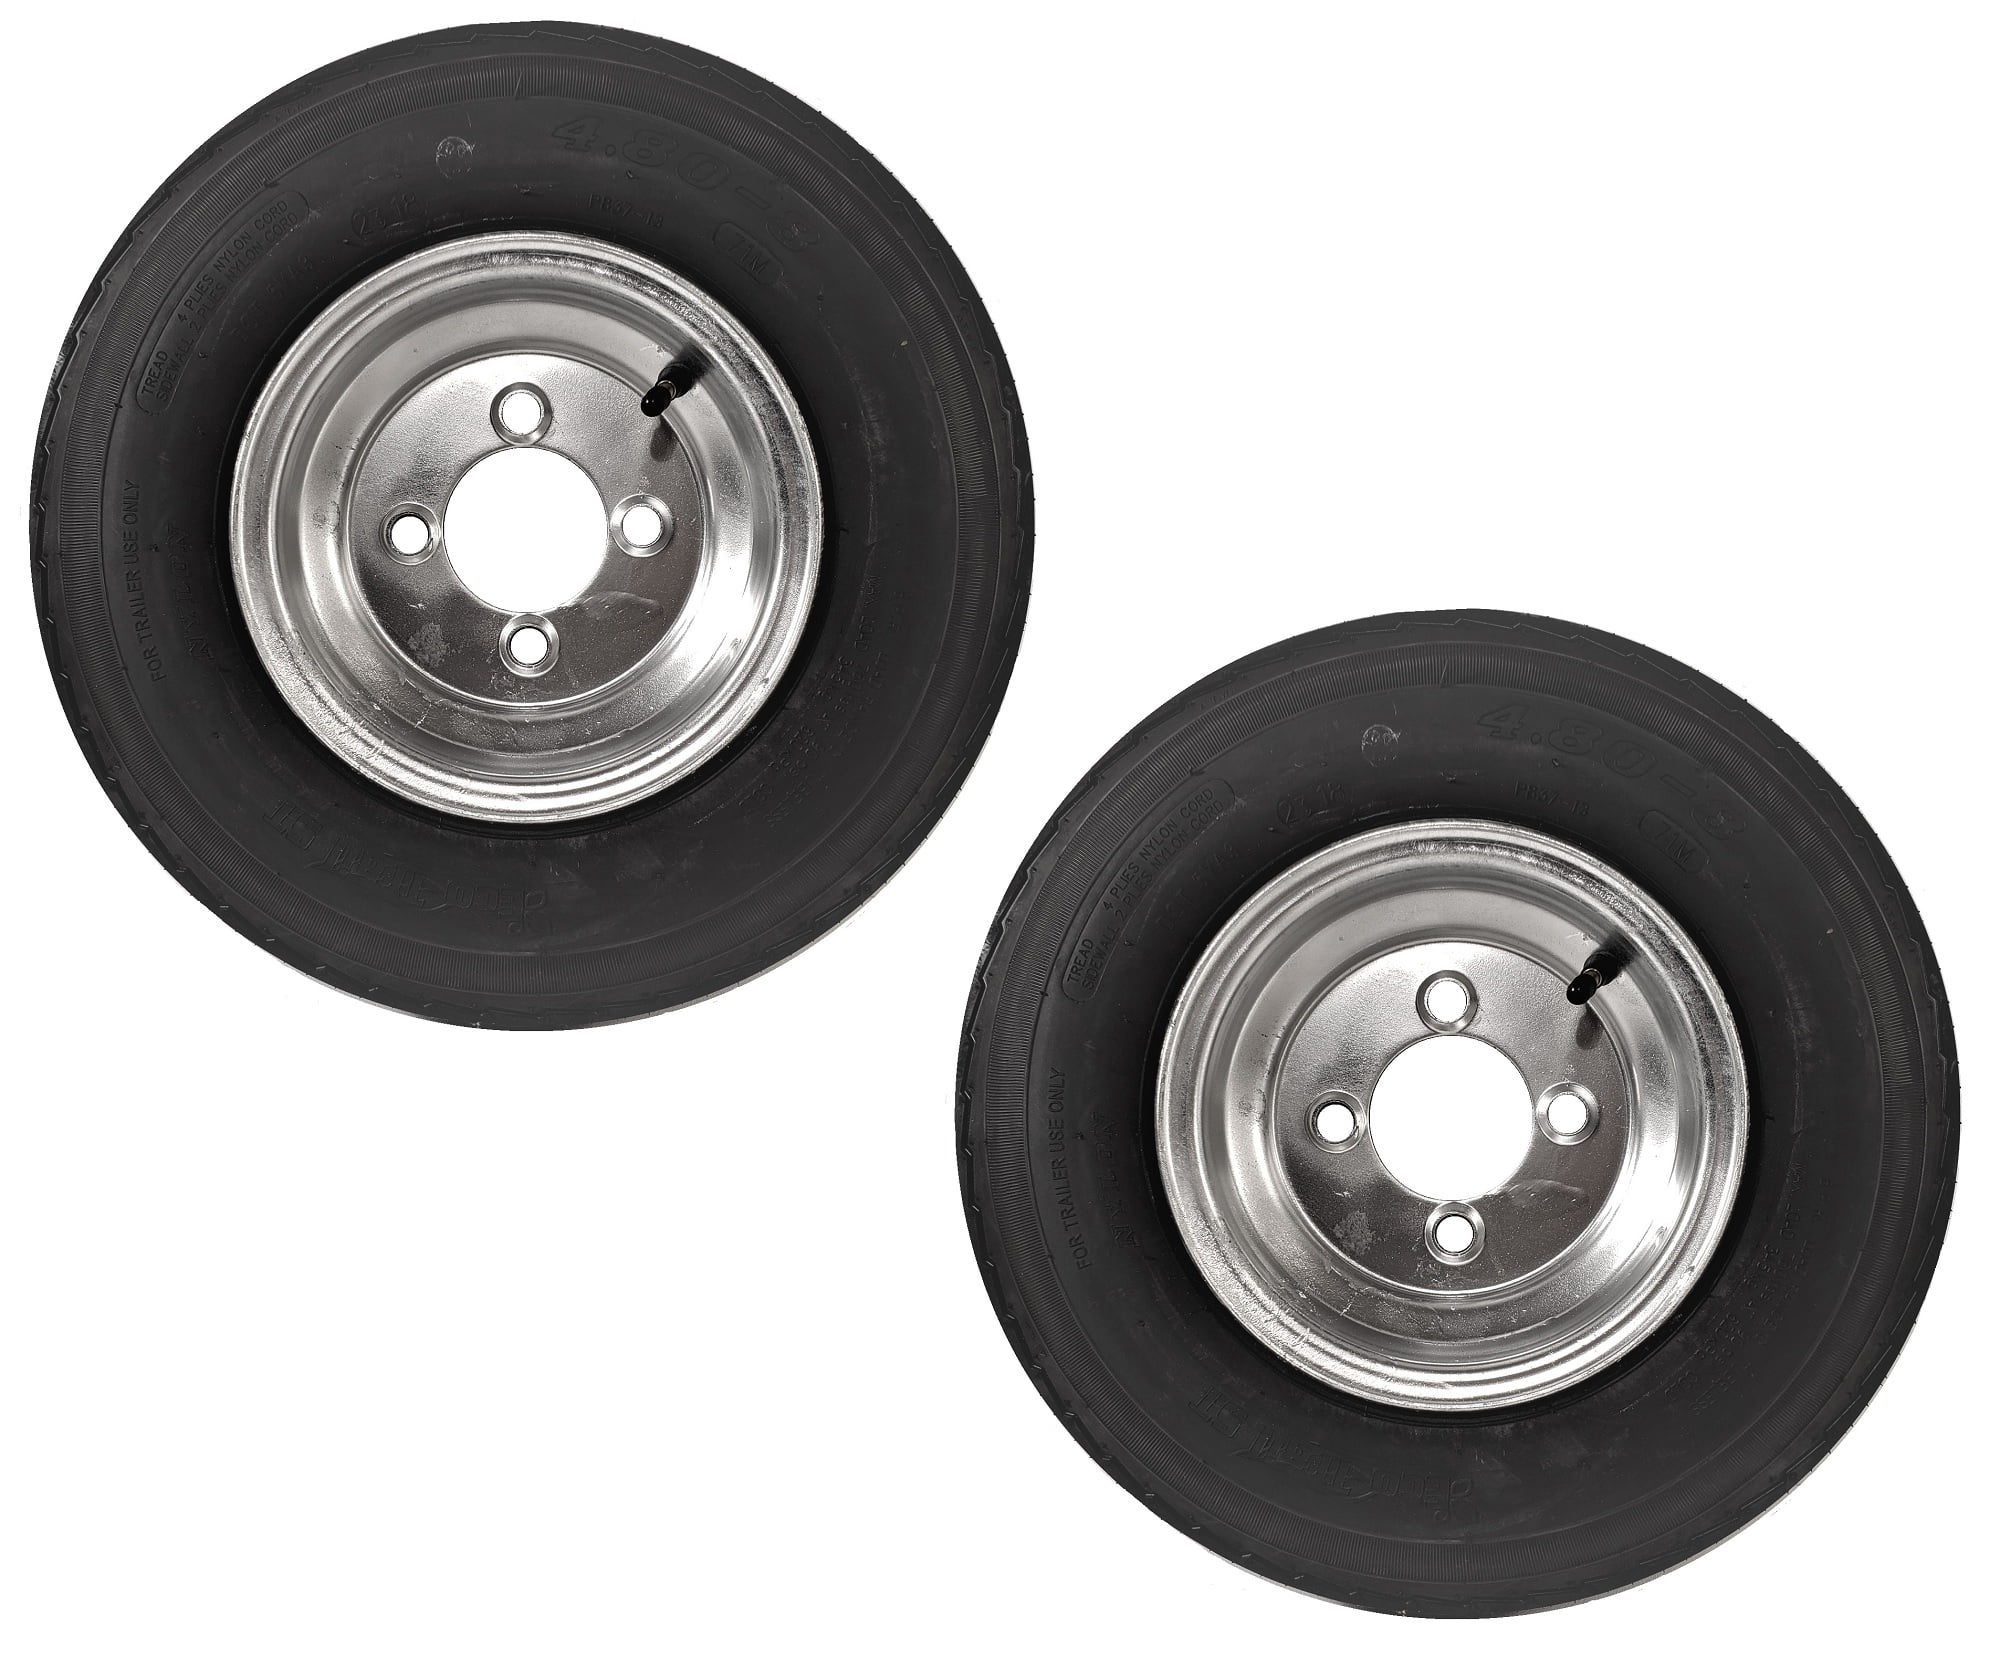 K9 Two 2 Size: Trailer TIRE 4.80-8 6ply, Tires 